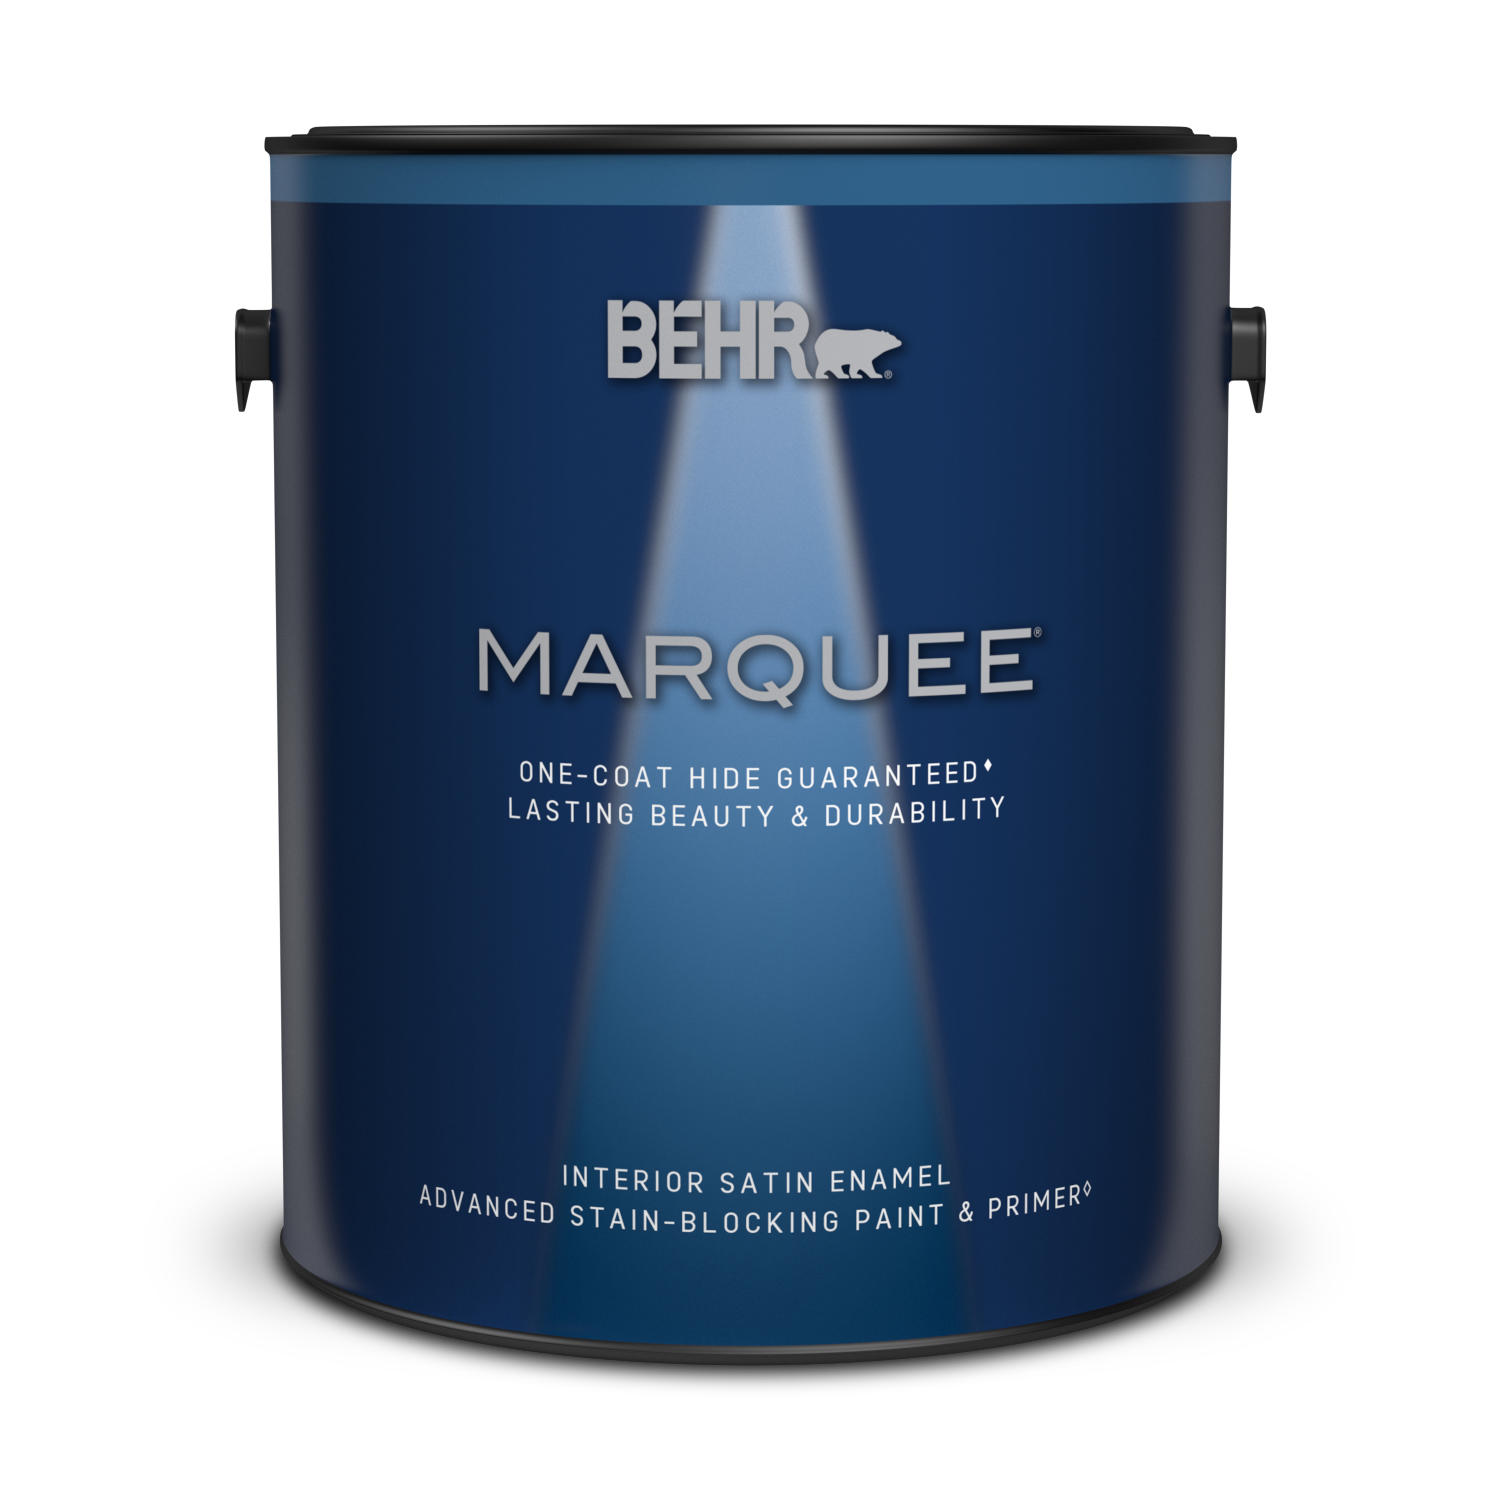 1 gallon can of Marquee Interior Satin Enamel Paint